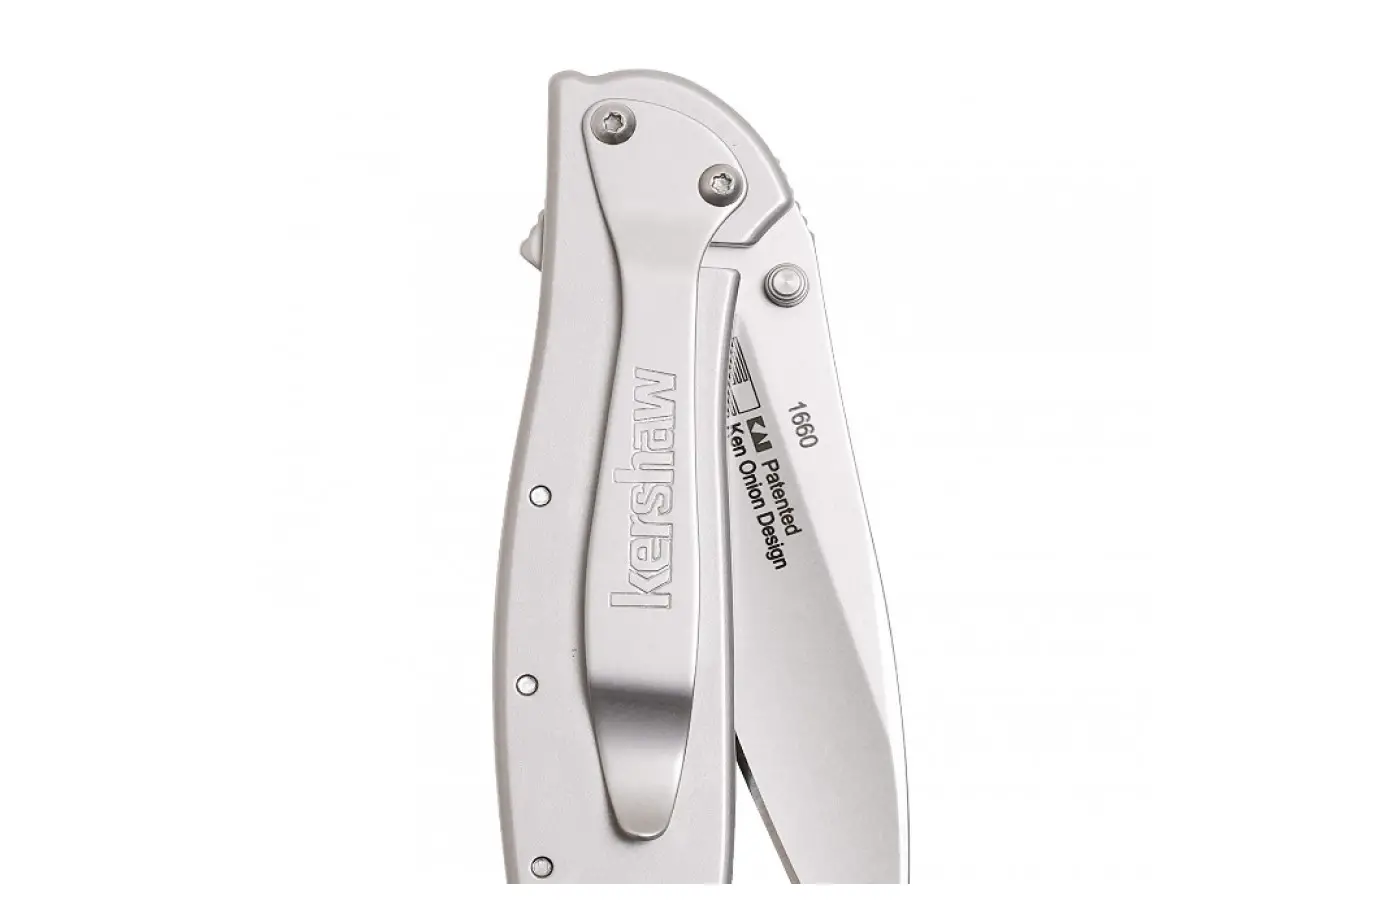 With high probability, this is the number one selling Kershaw EDC being sold.